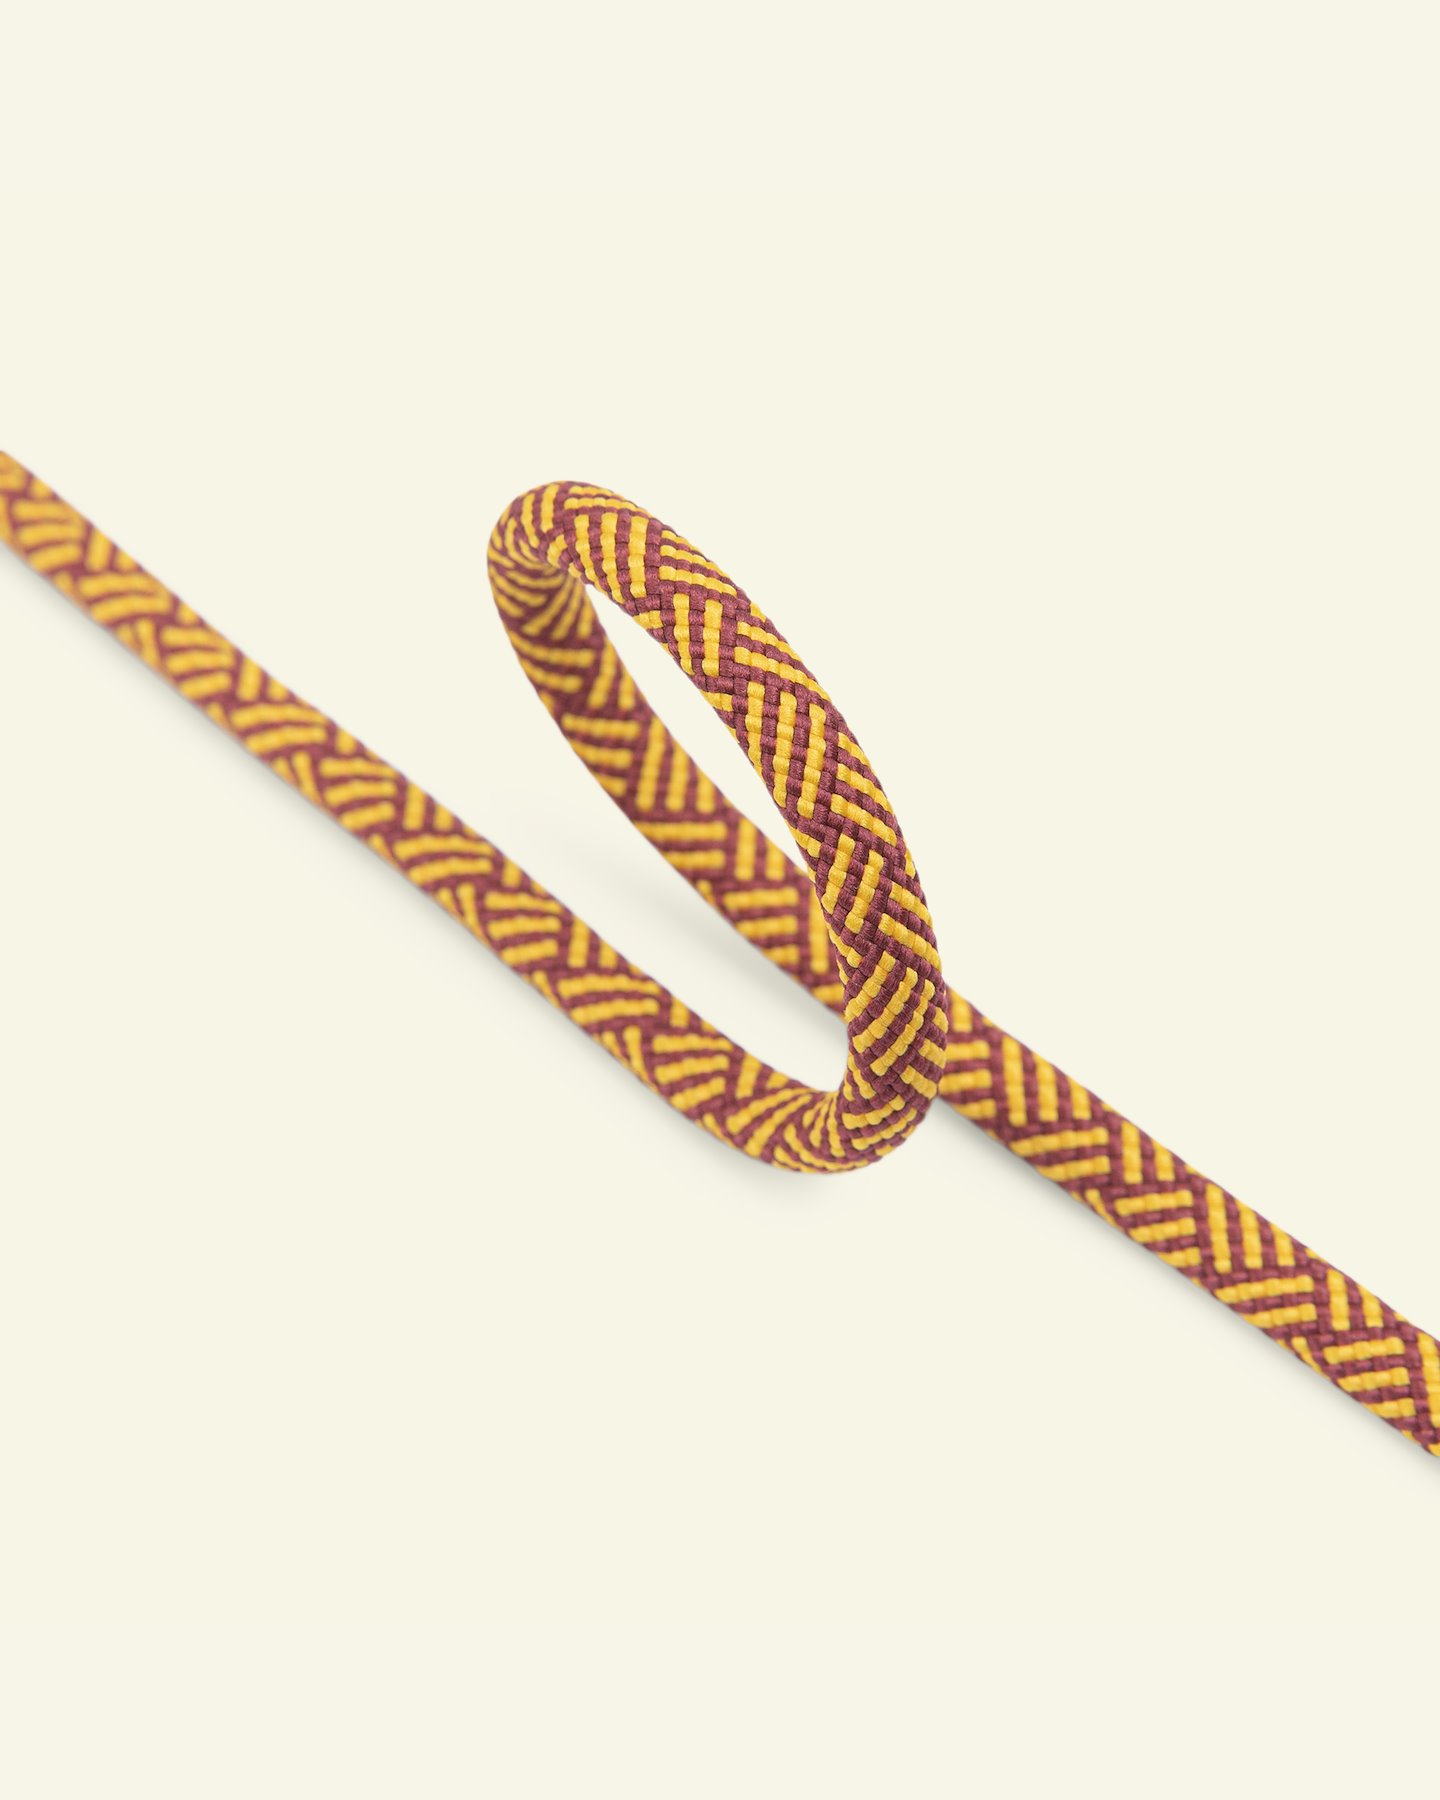 Parachute cord 8mm winered/orange 3m 22466_pack.png